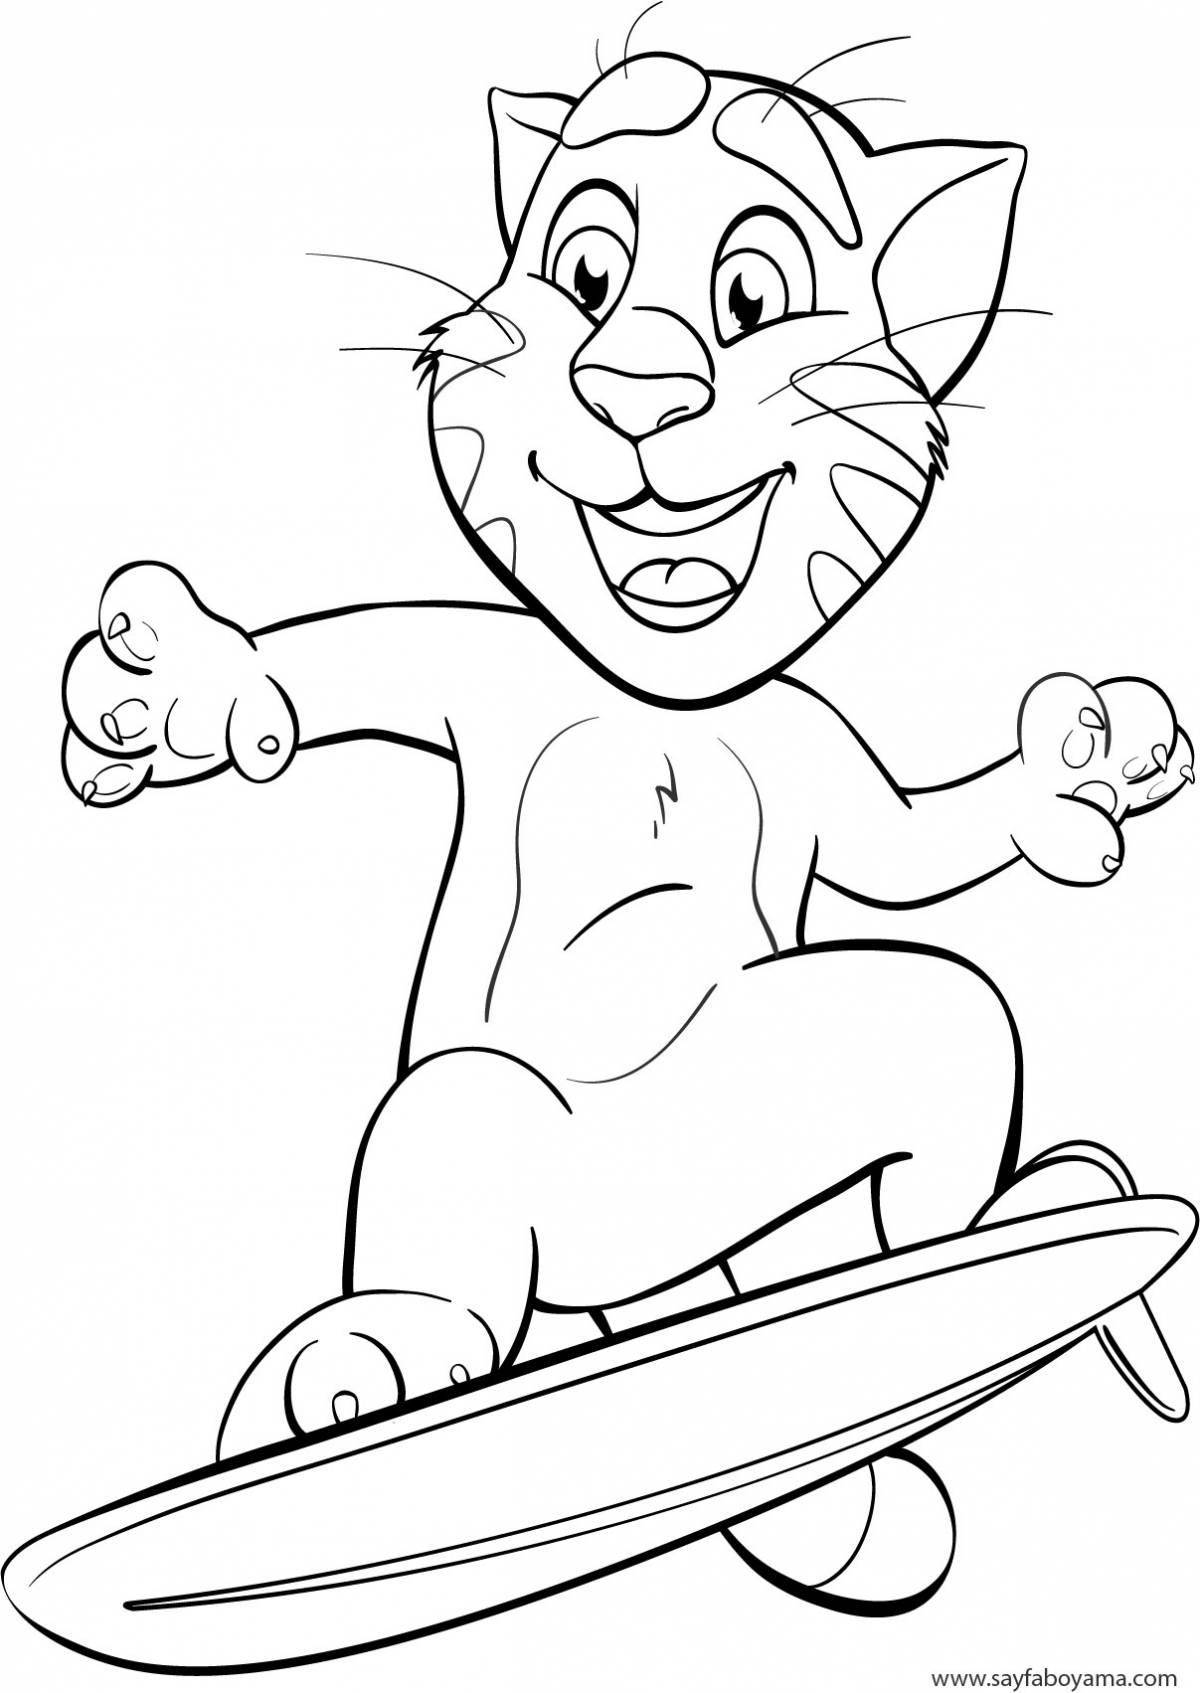 Radiant hank coloring page